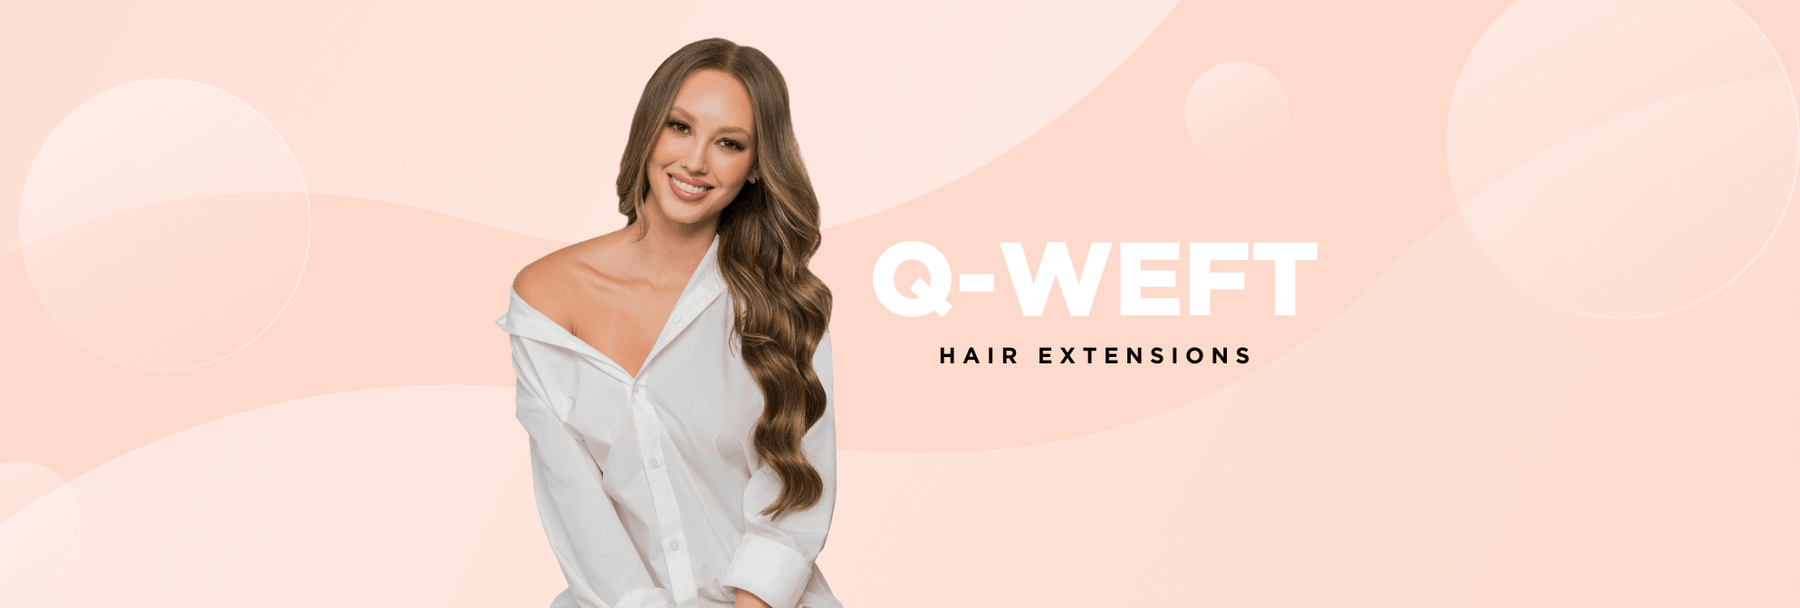 Aqua Q-Weft Hair Extension System for Proessionals Only